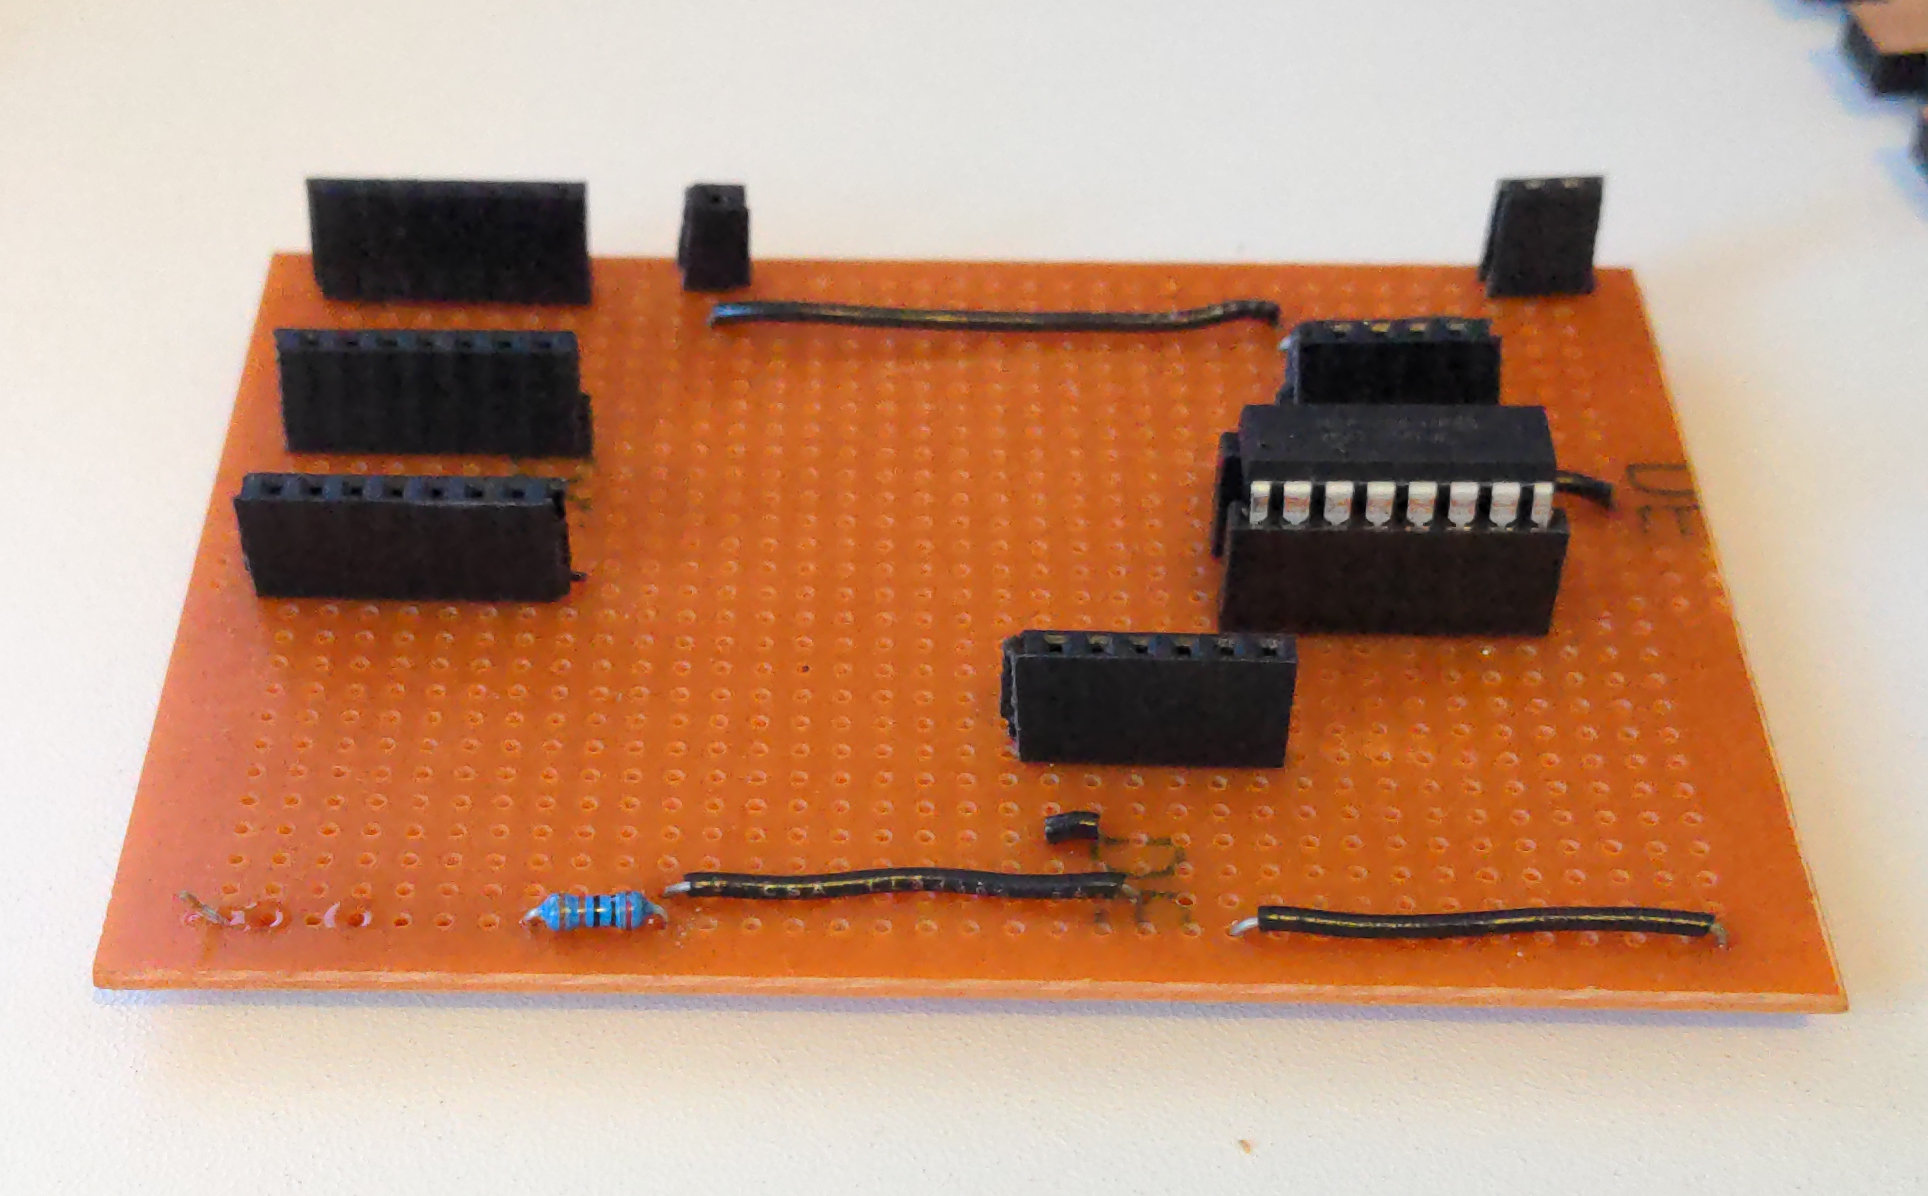 Top view of the stripboard with the MCP3008 mounted